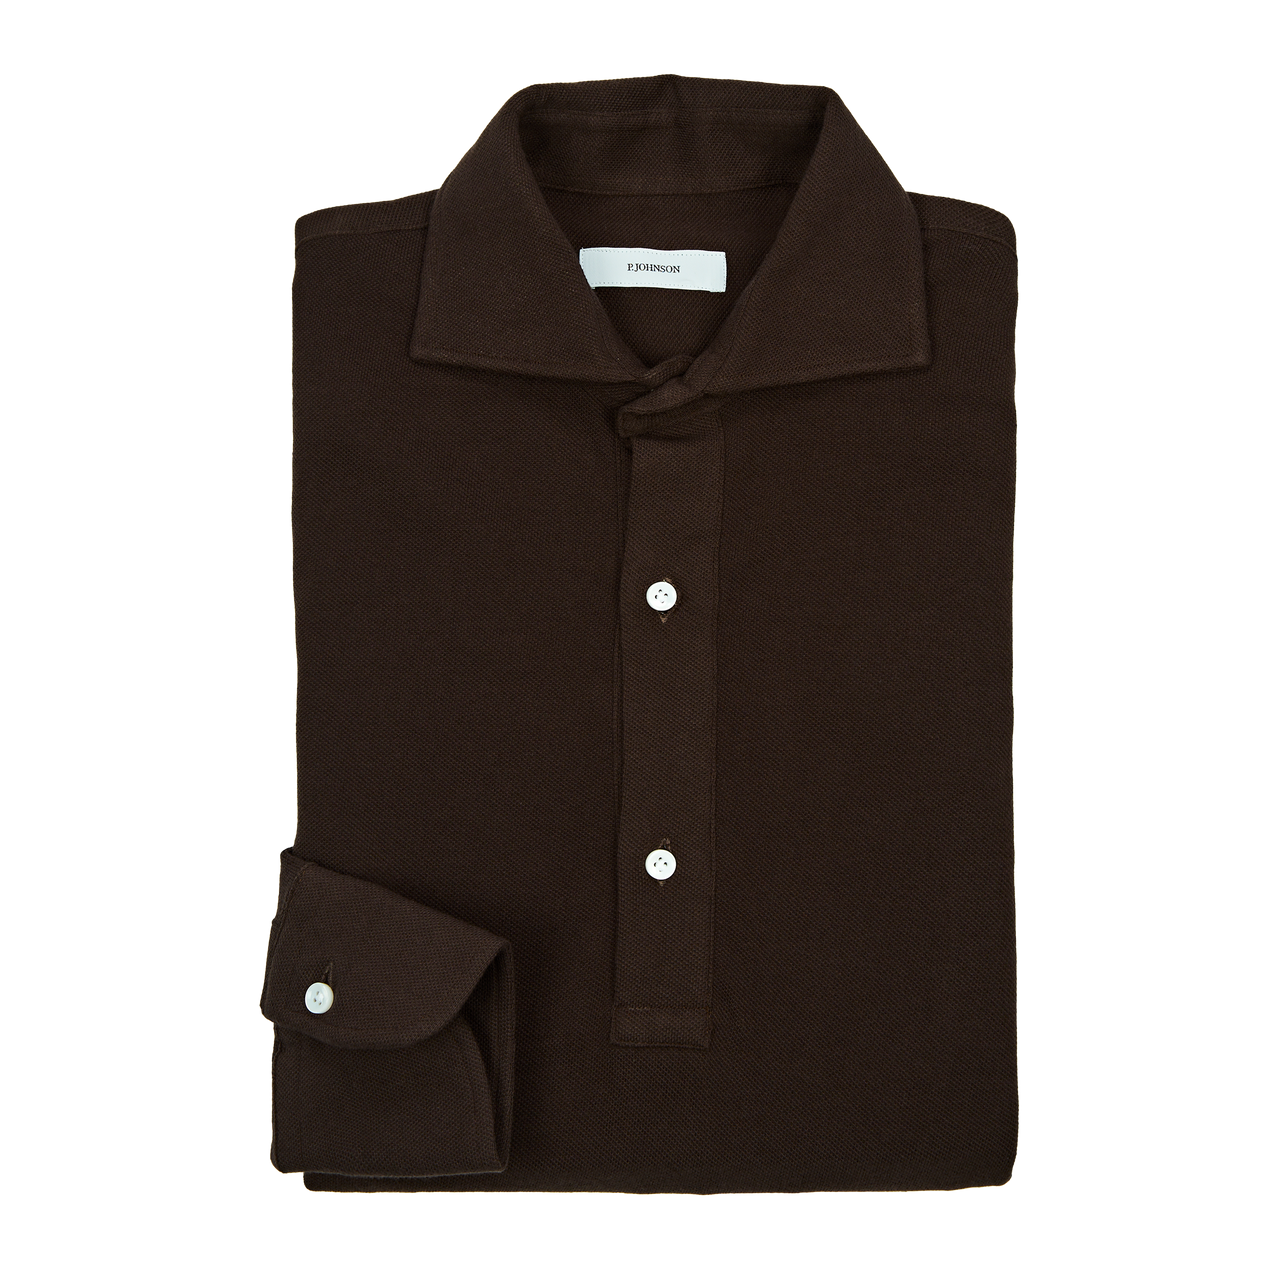 P. Johnson Popover in Chocolate Brown Cotton Pique with Cutaway Collar